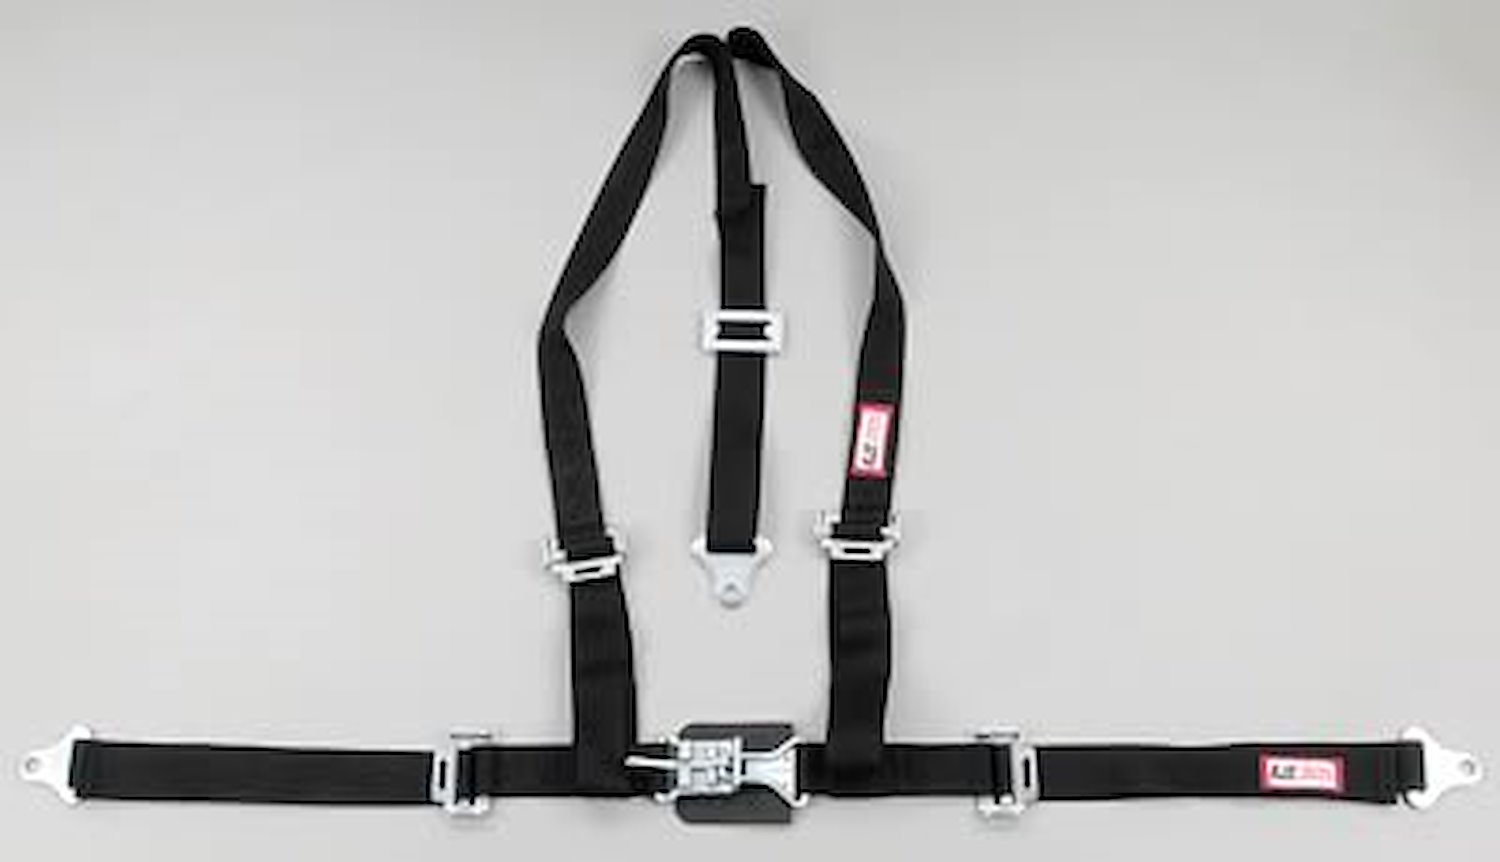 NON-SFI L&L HARNESS 3 PULL DOWN Lap Belt SEWN IN 2 Shoulder Harness V ROLL BAR Mount w/STERNUM STRAP ALL SNAP ENDS GRAY